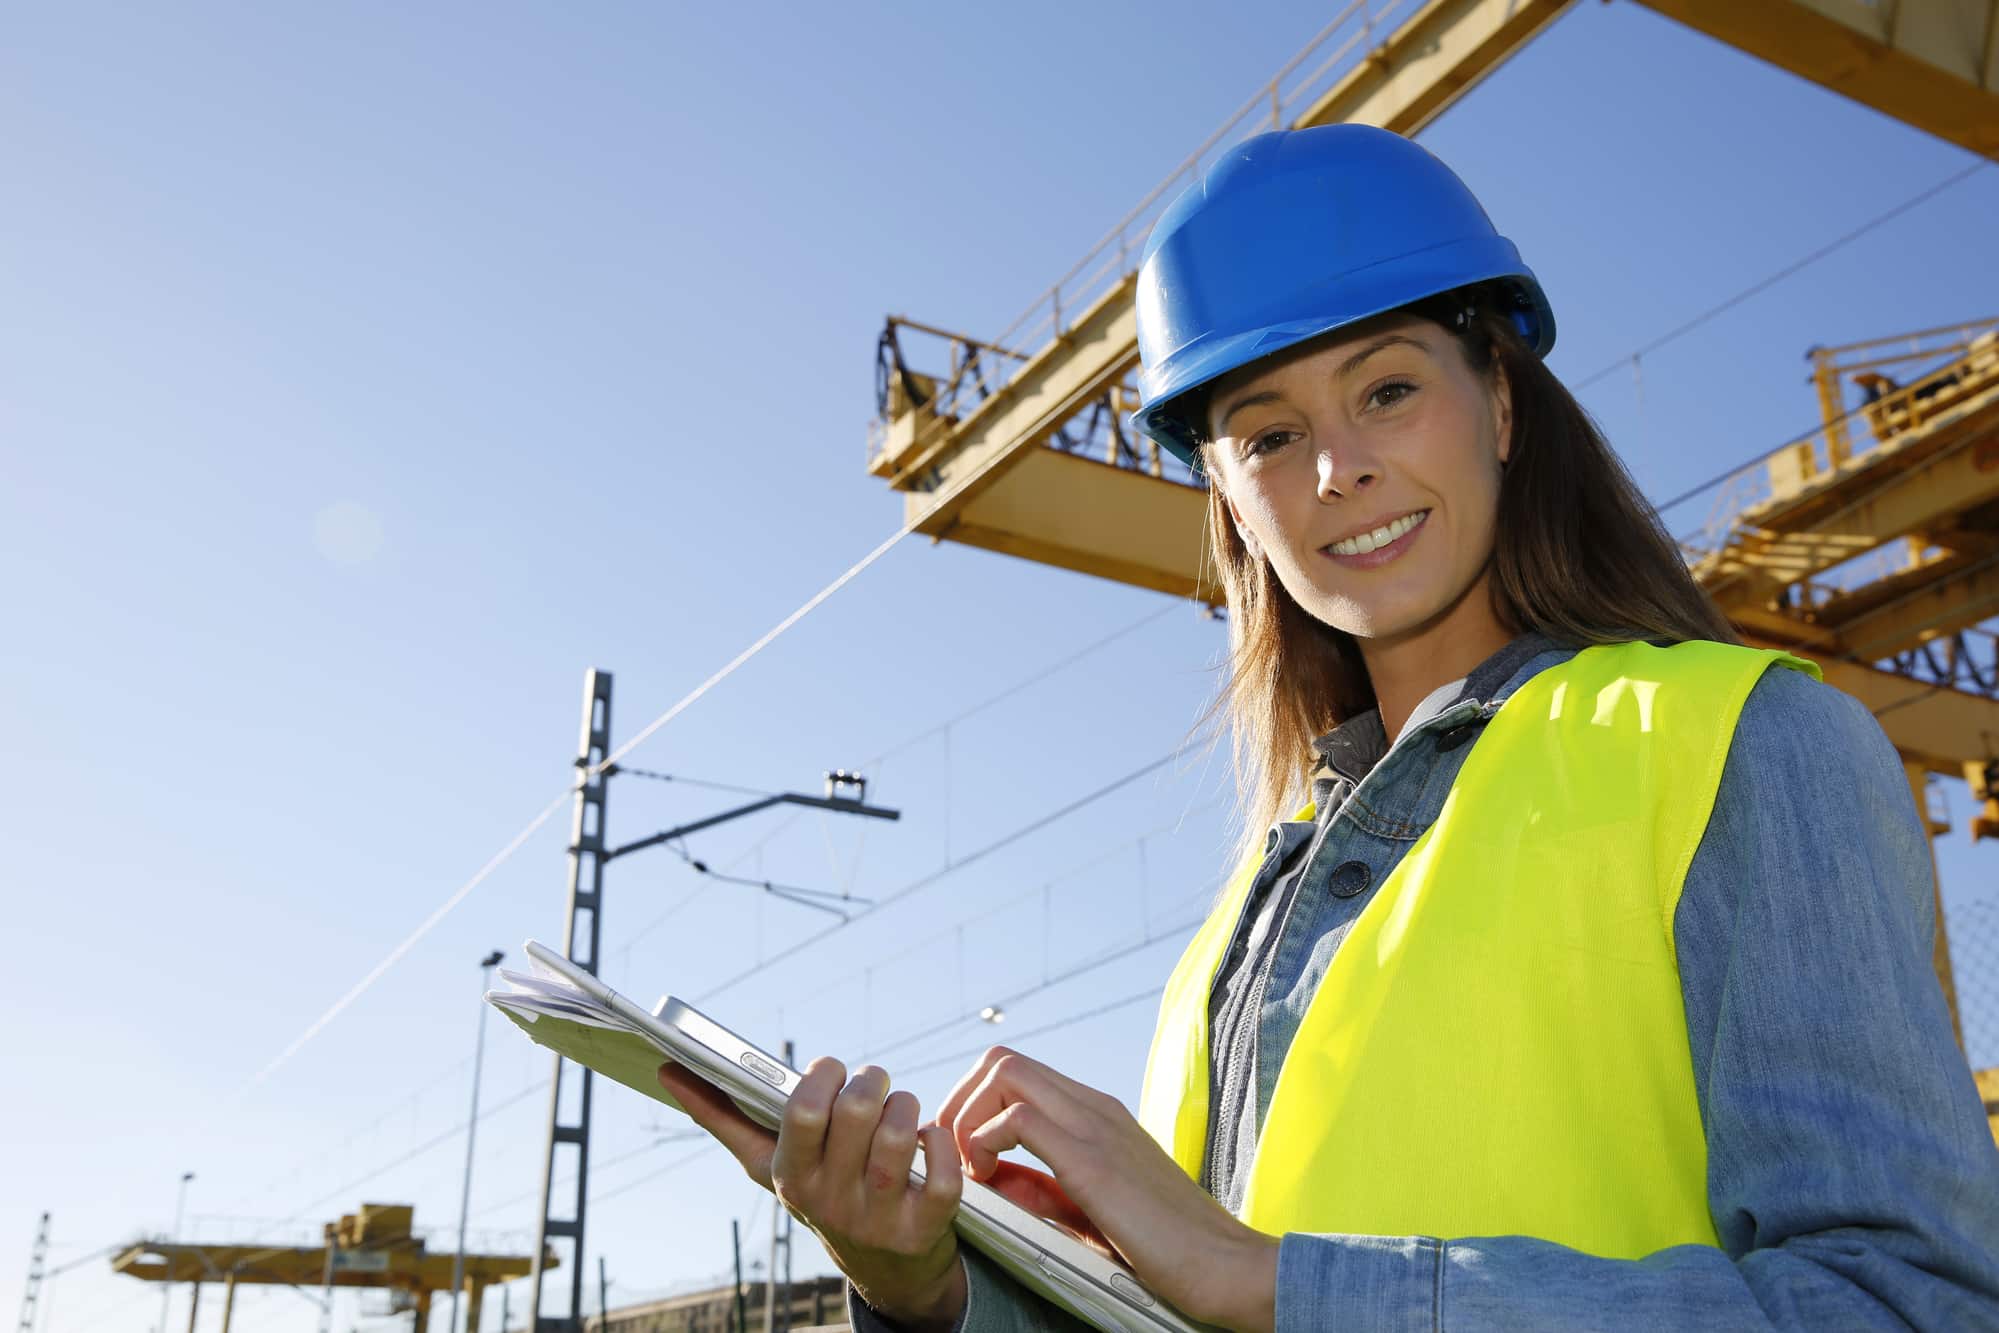 Building Inspection-Trades Skills for Women